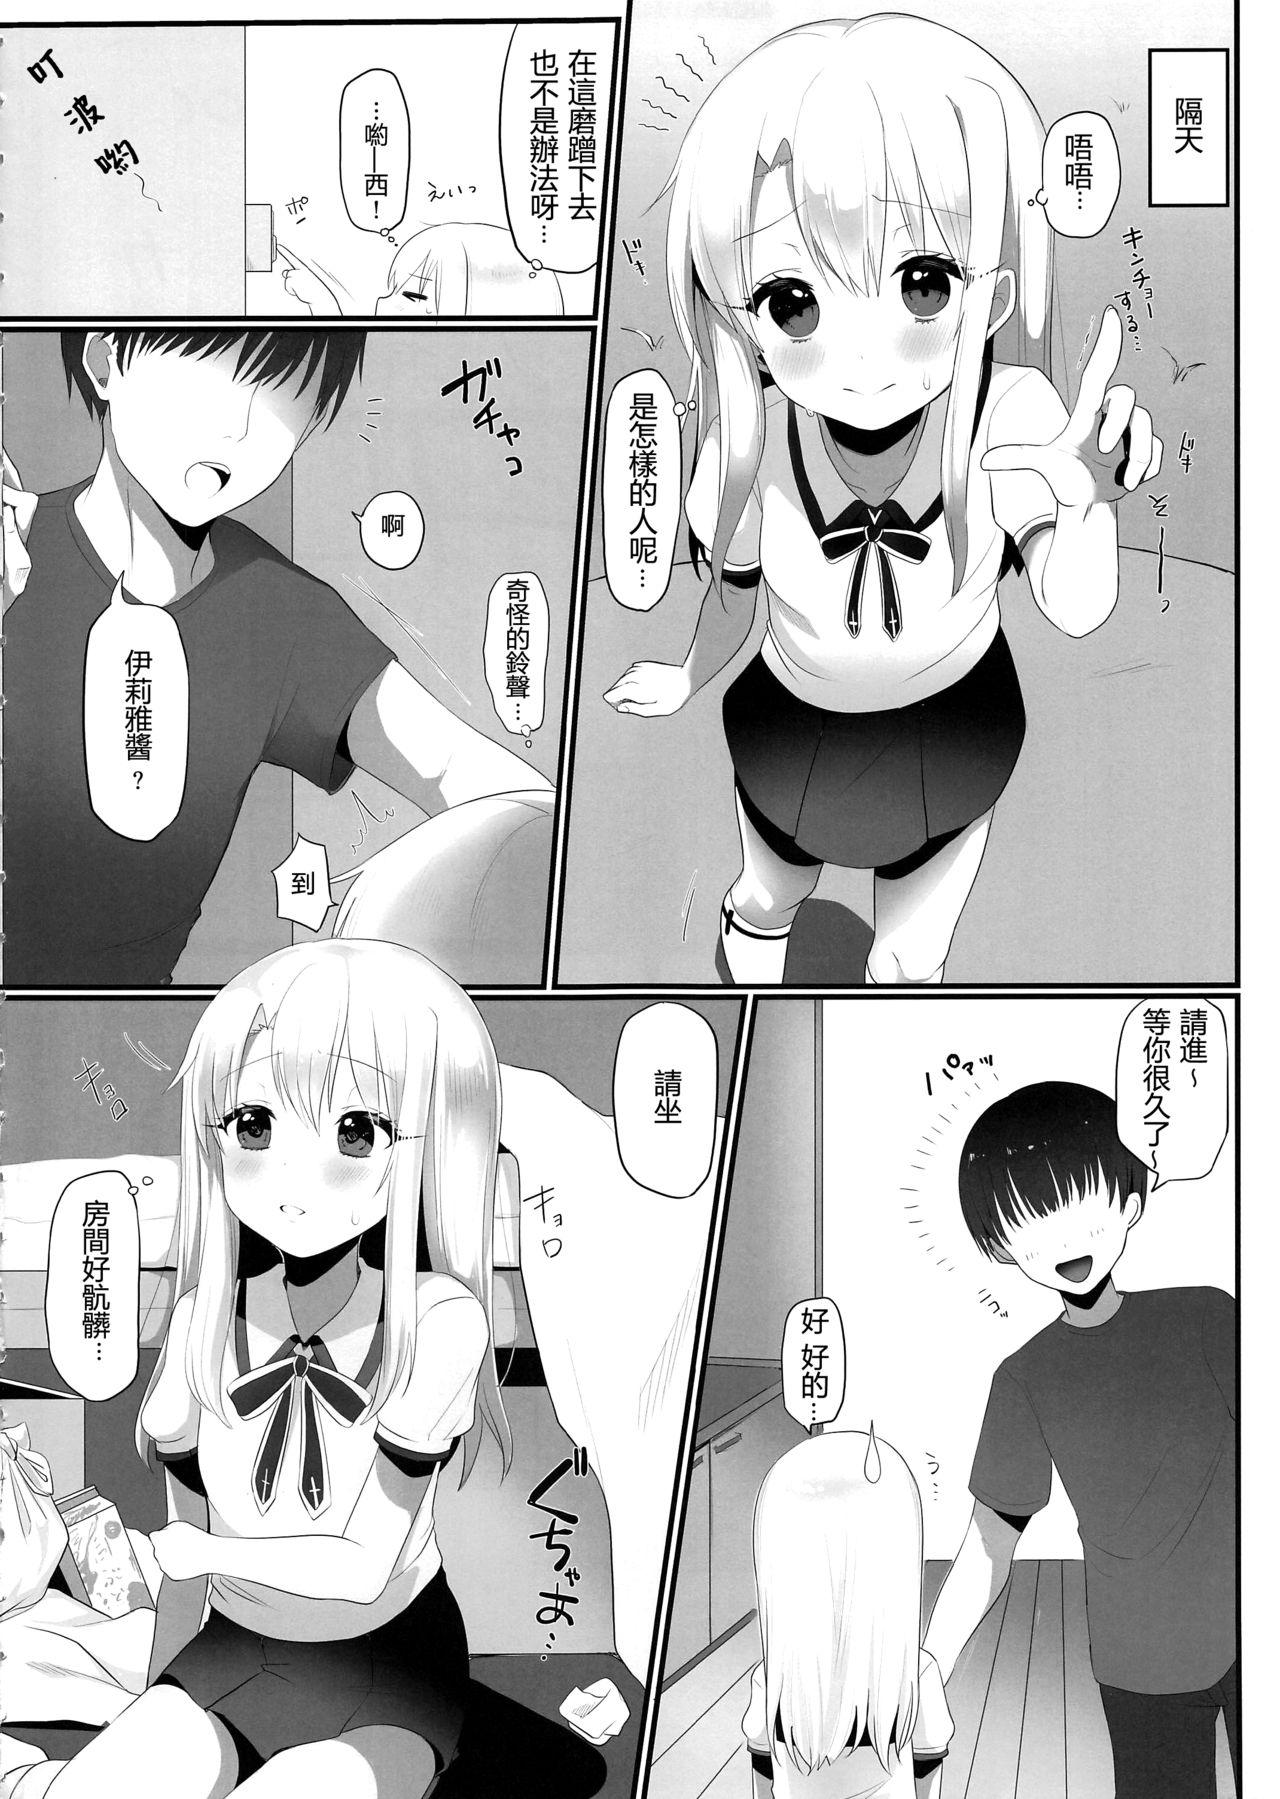 Pussy Fingering Shucchou Mahou Shoujo Maid - Fate kaleid liner prisma illya Pervs - Page 8